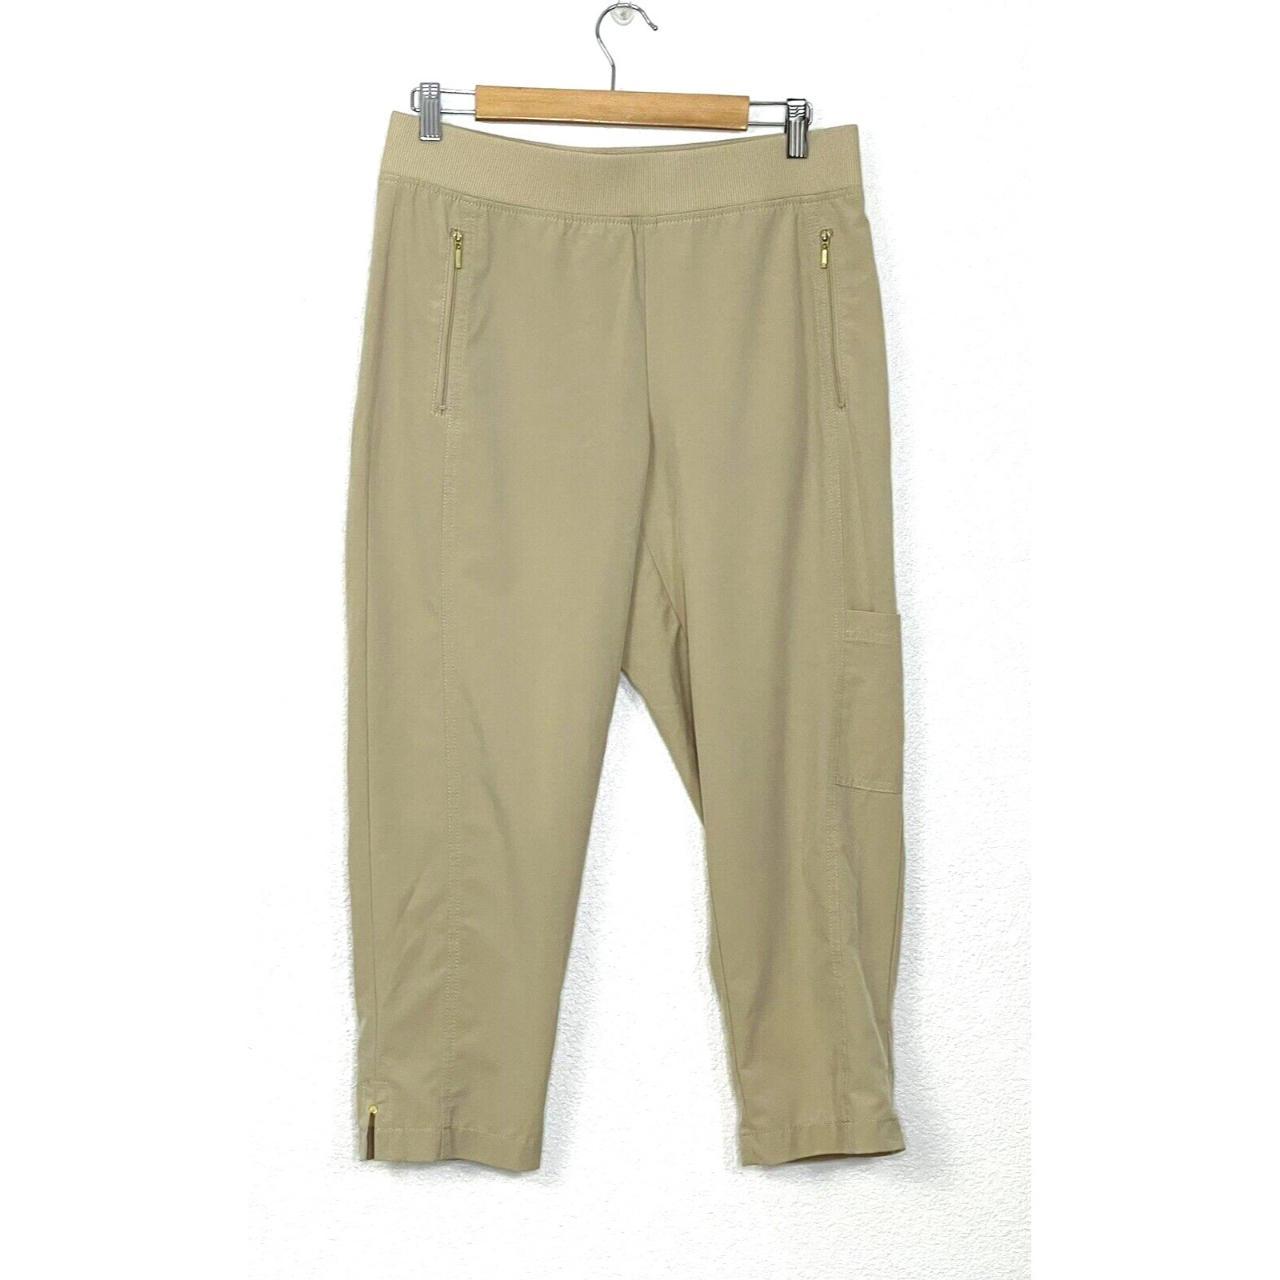 Dickies Women's Twill Cropped Pants in stock at SPoT Skate Shop